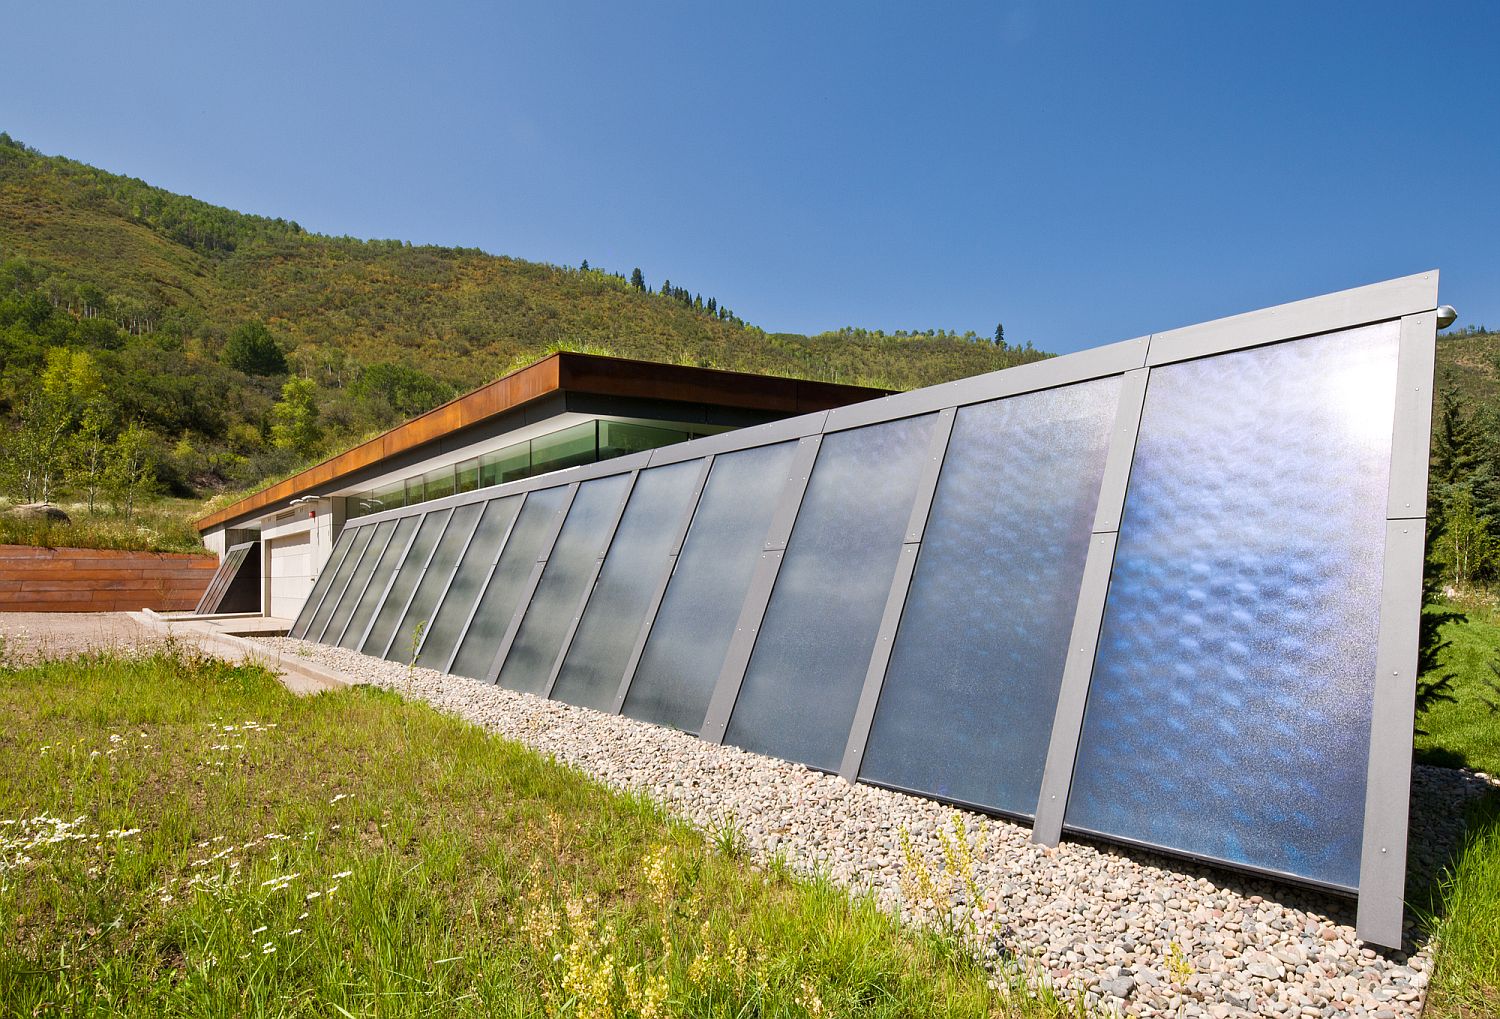 Photovoltaic panels coupled with a green roof create a lovely green home